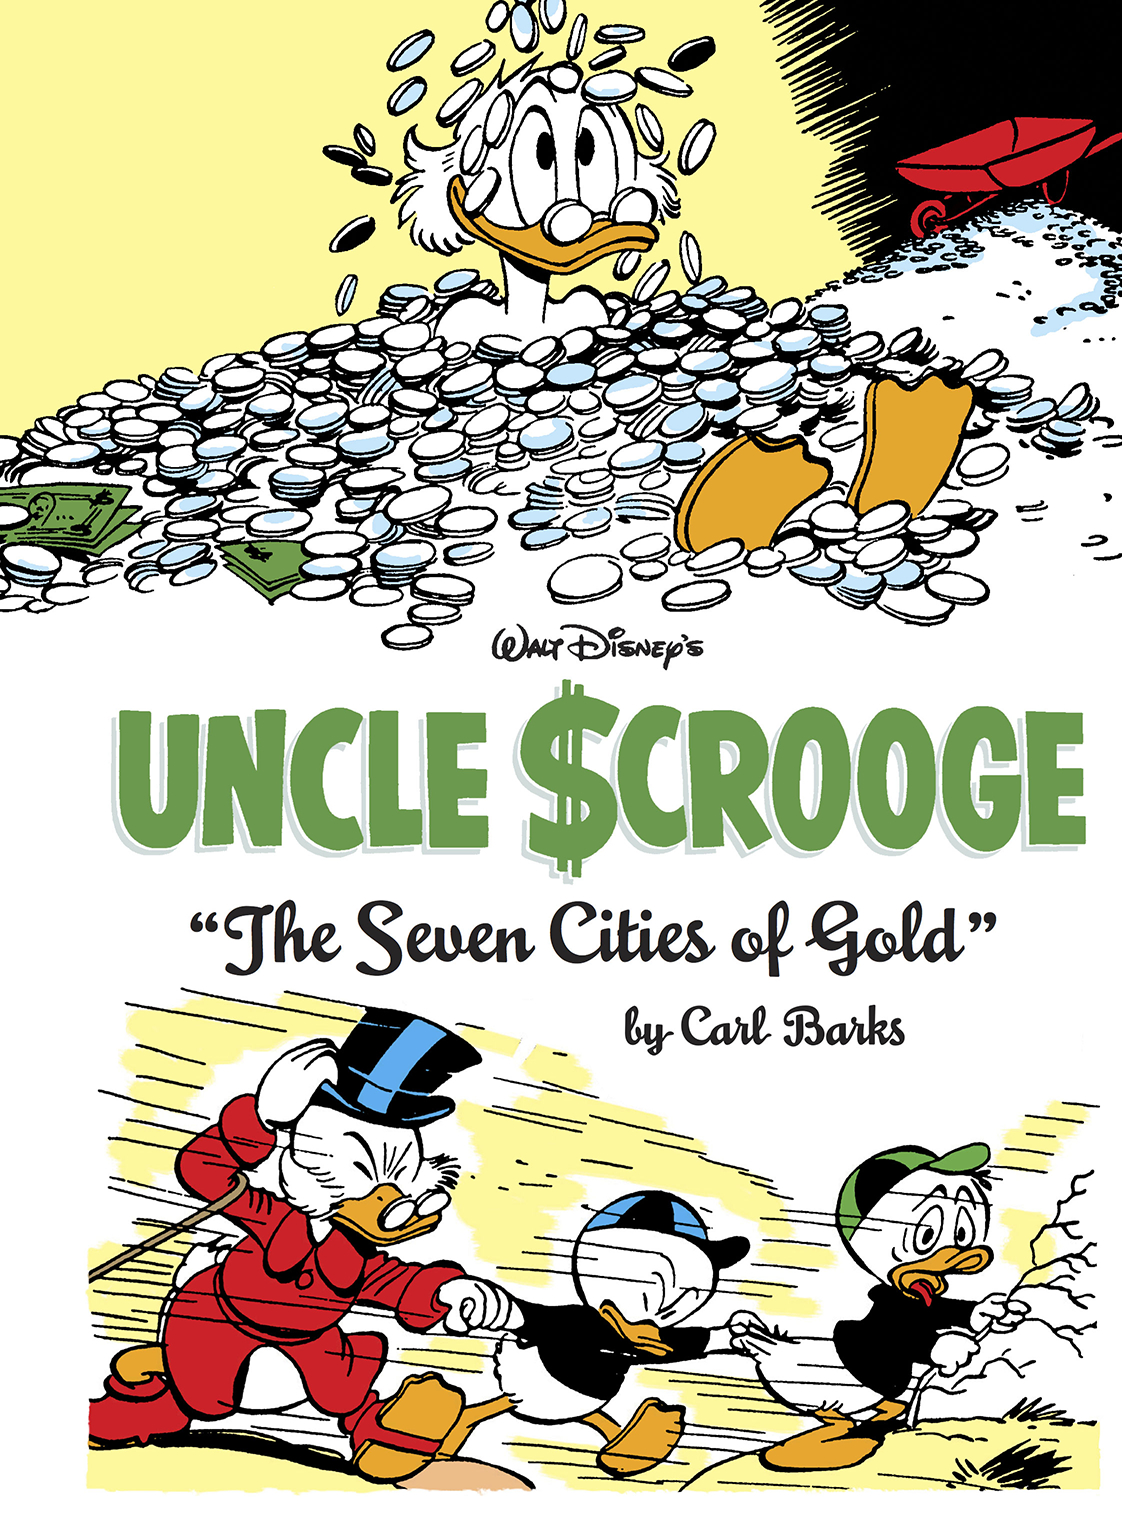 Complete Carl Barks Disney Library Hardcover Volume 14 Walt Disney's Uncle Scrooge The Seven Cities of Gold